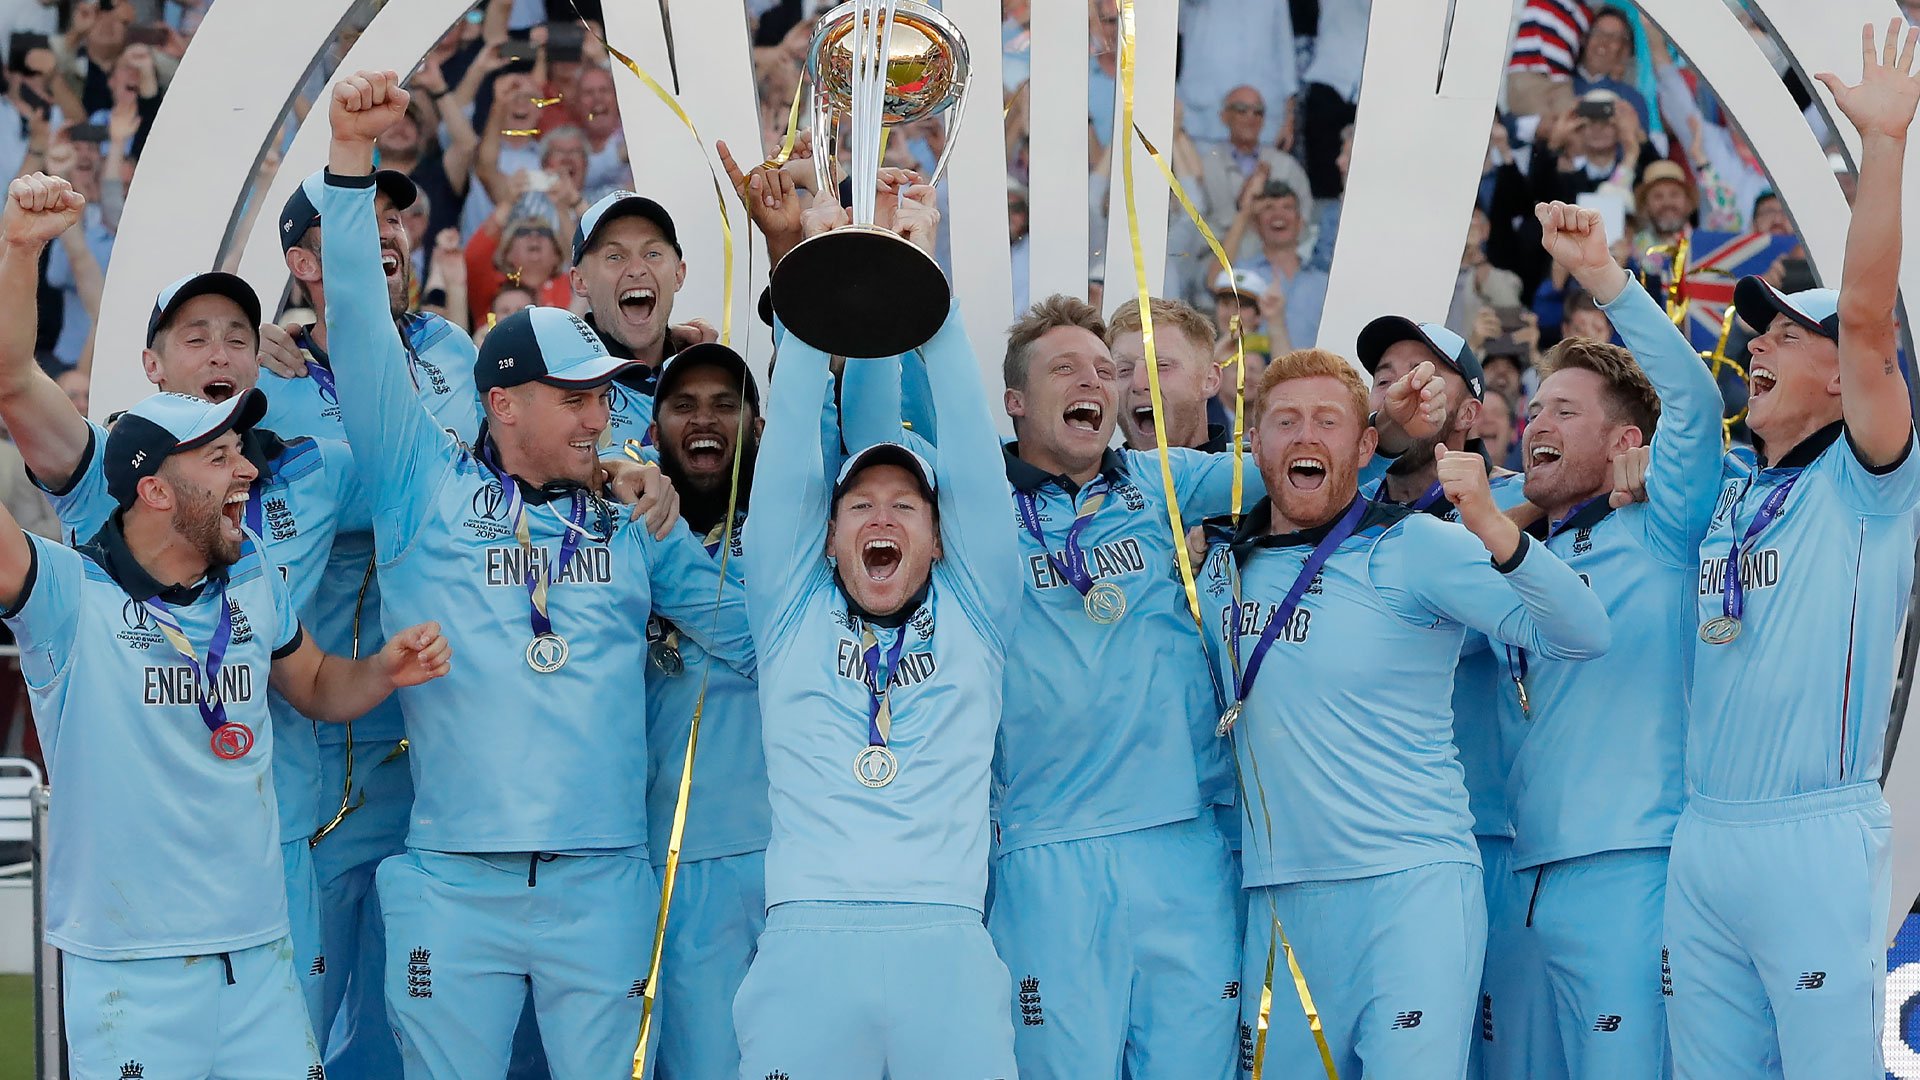 Cricket World Cup Doc 'The Greatest Game' Acquired by Sky: Trailer